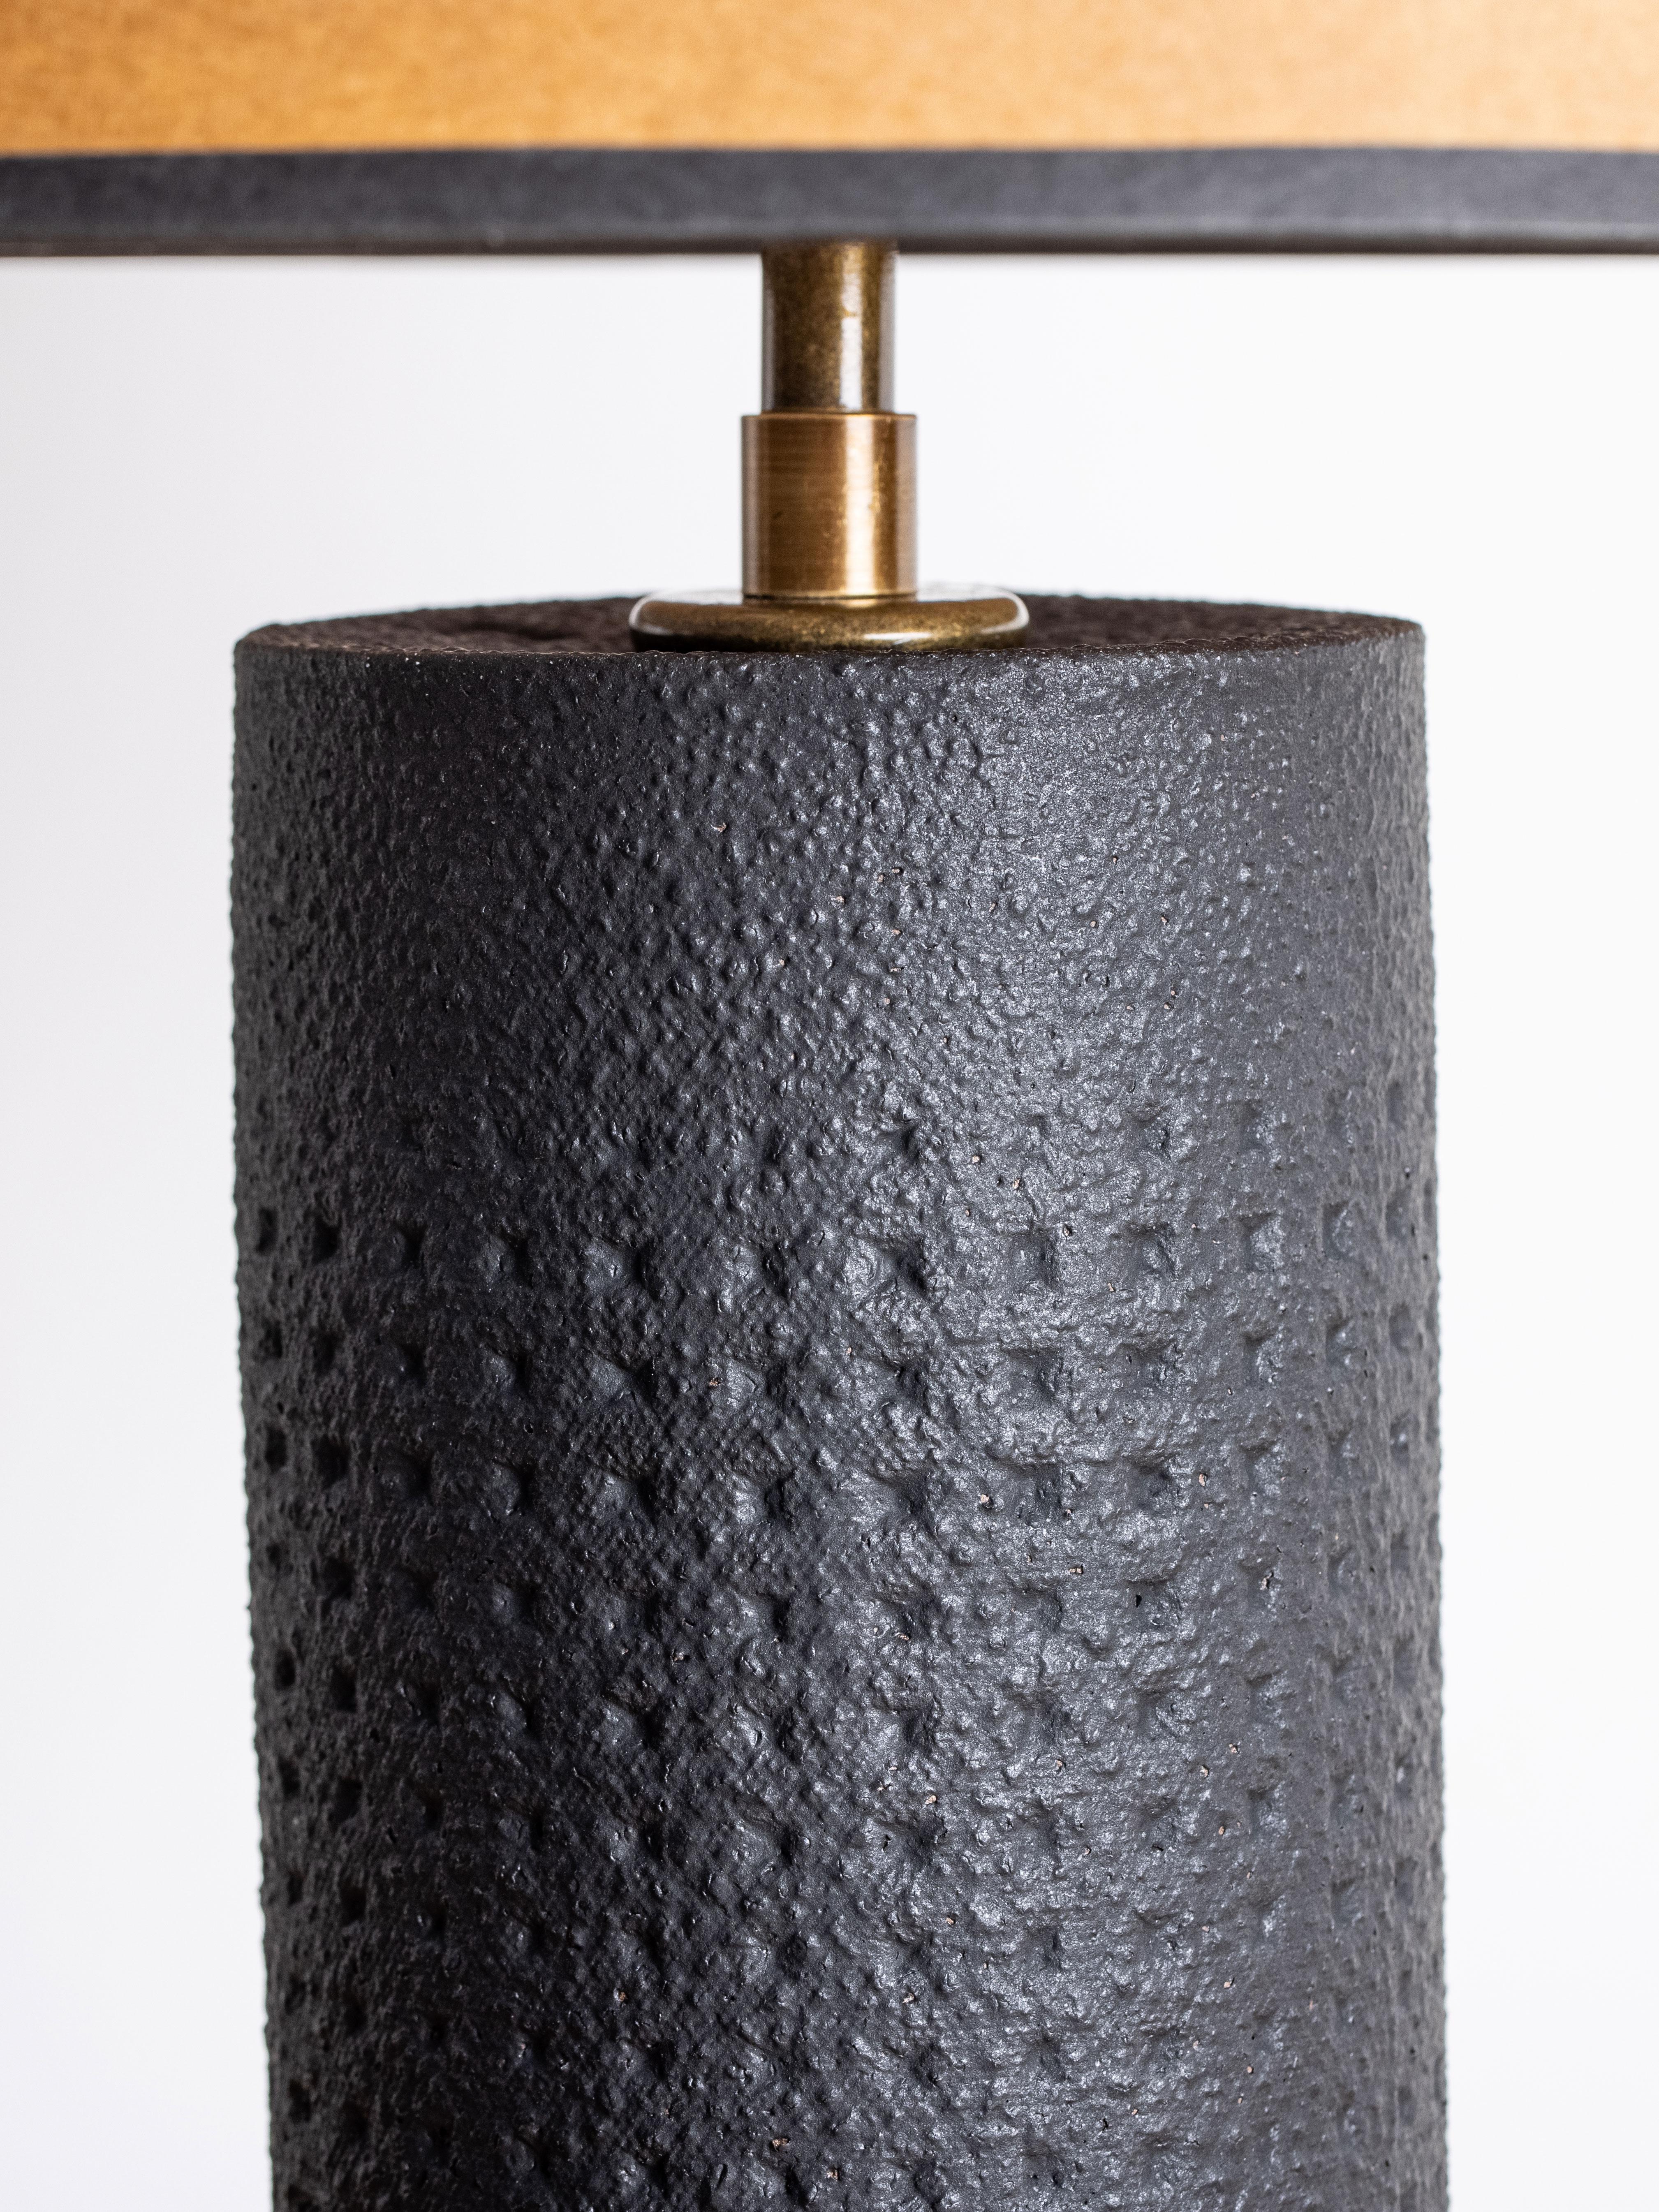 Our stoneware Juliette Lamp is handcrafted using slab-construction techniques. The lamp’s pattern is created by rolling the surface with textured rolling pins and rods.

FINISH

- Matte-black dipped glaze
- Antique brass fittings
- Twisted